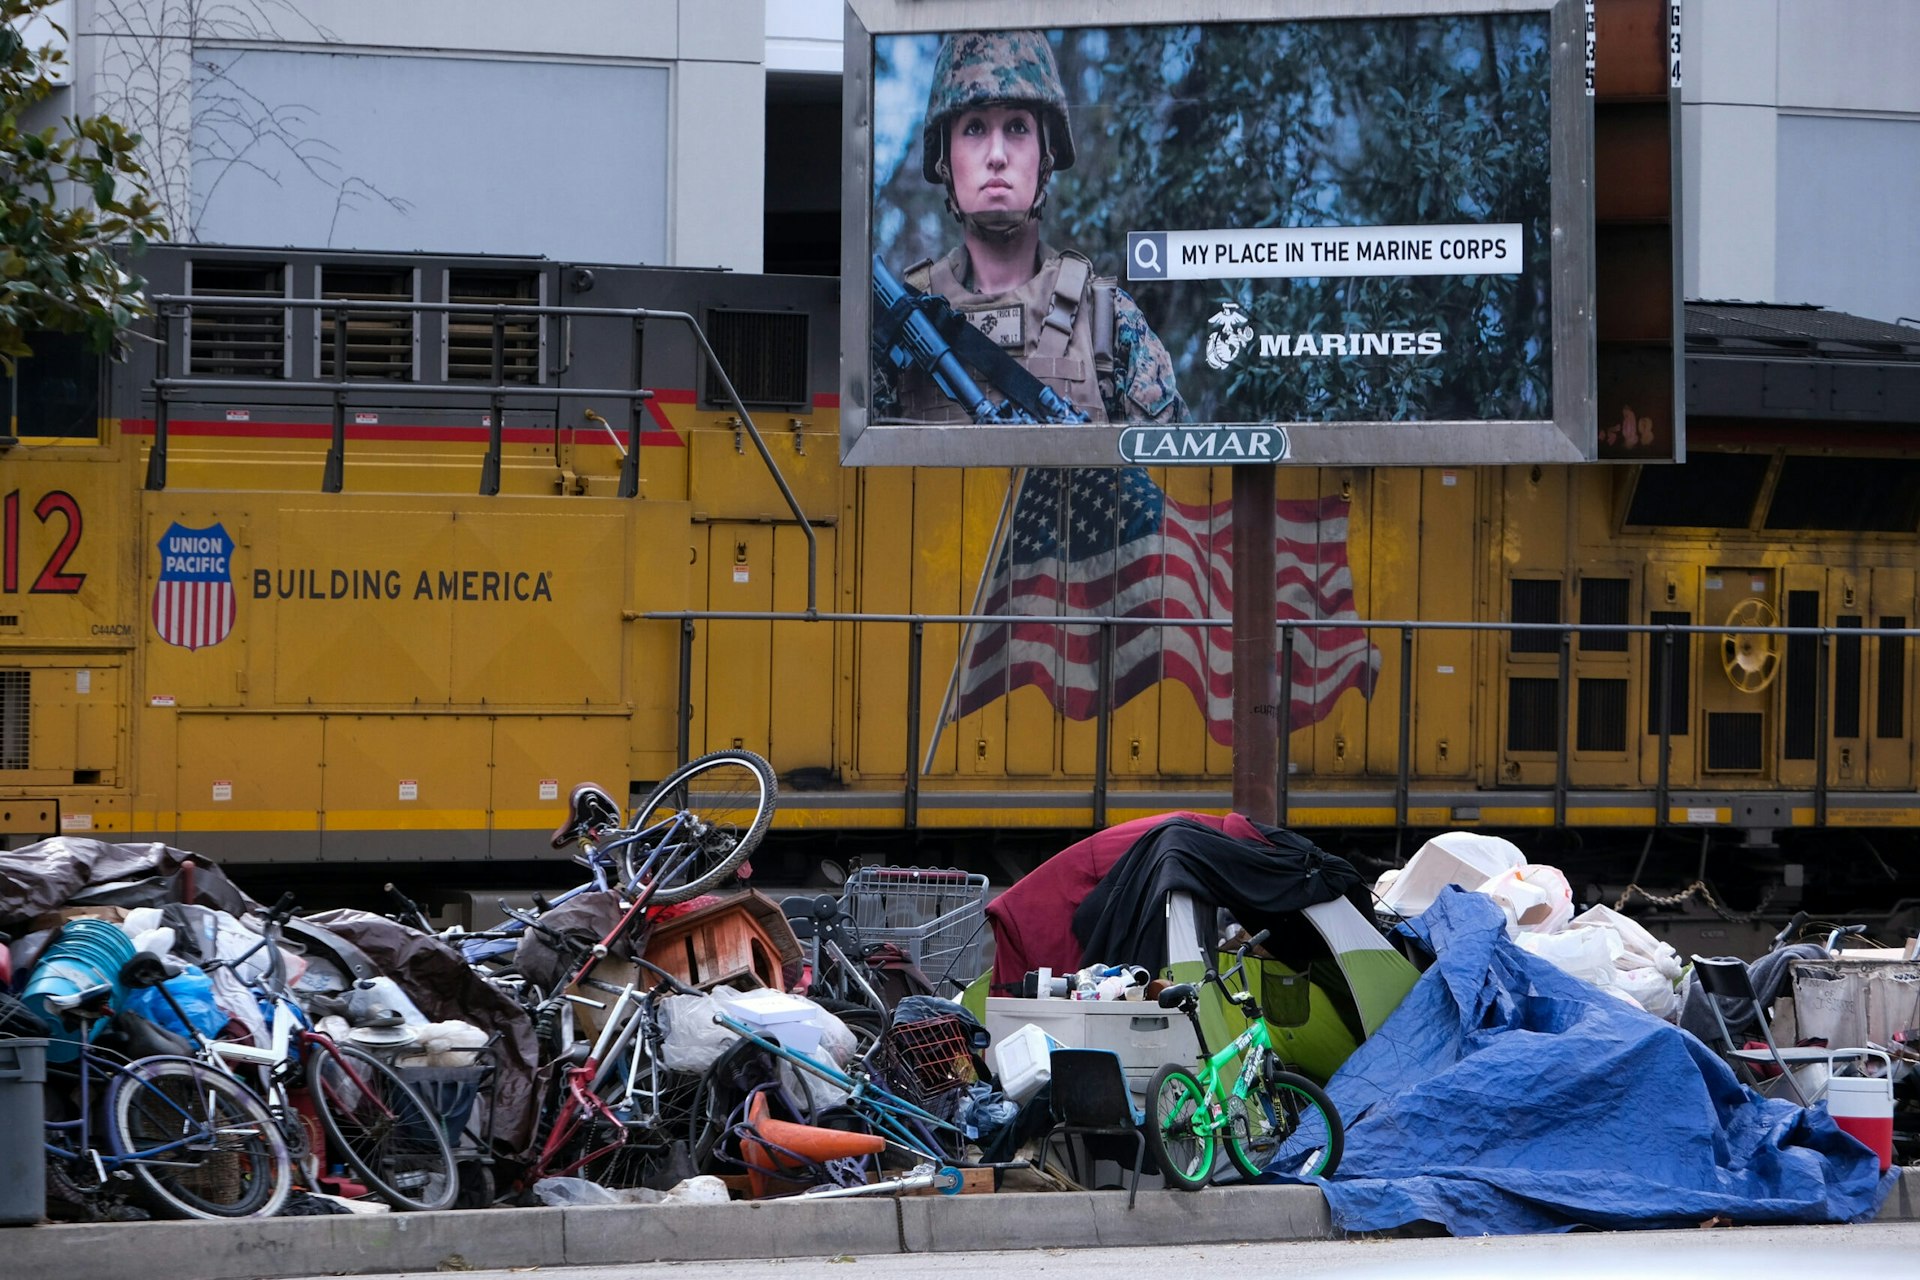 A Marine Corps billboard stands over a homeless encampment in Los Angeles.